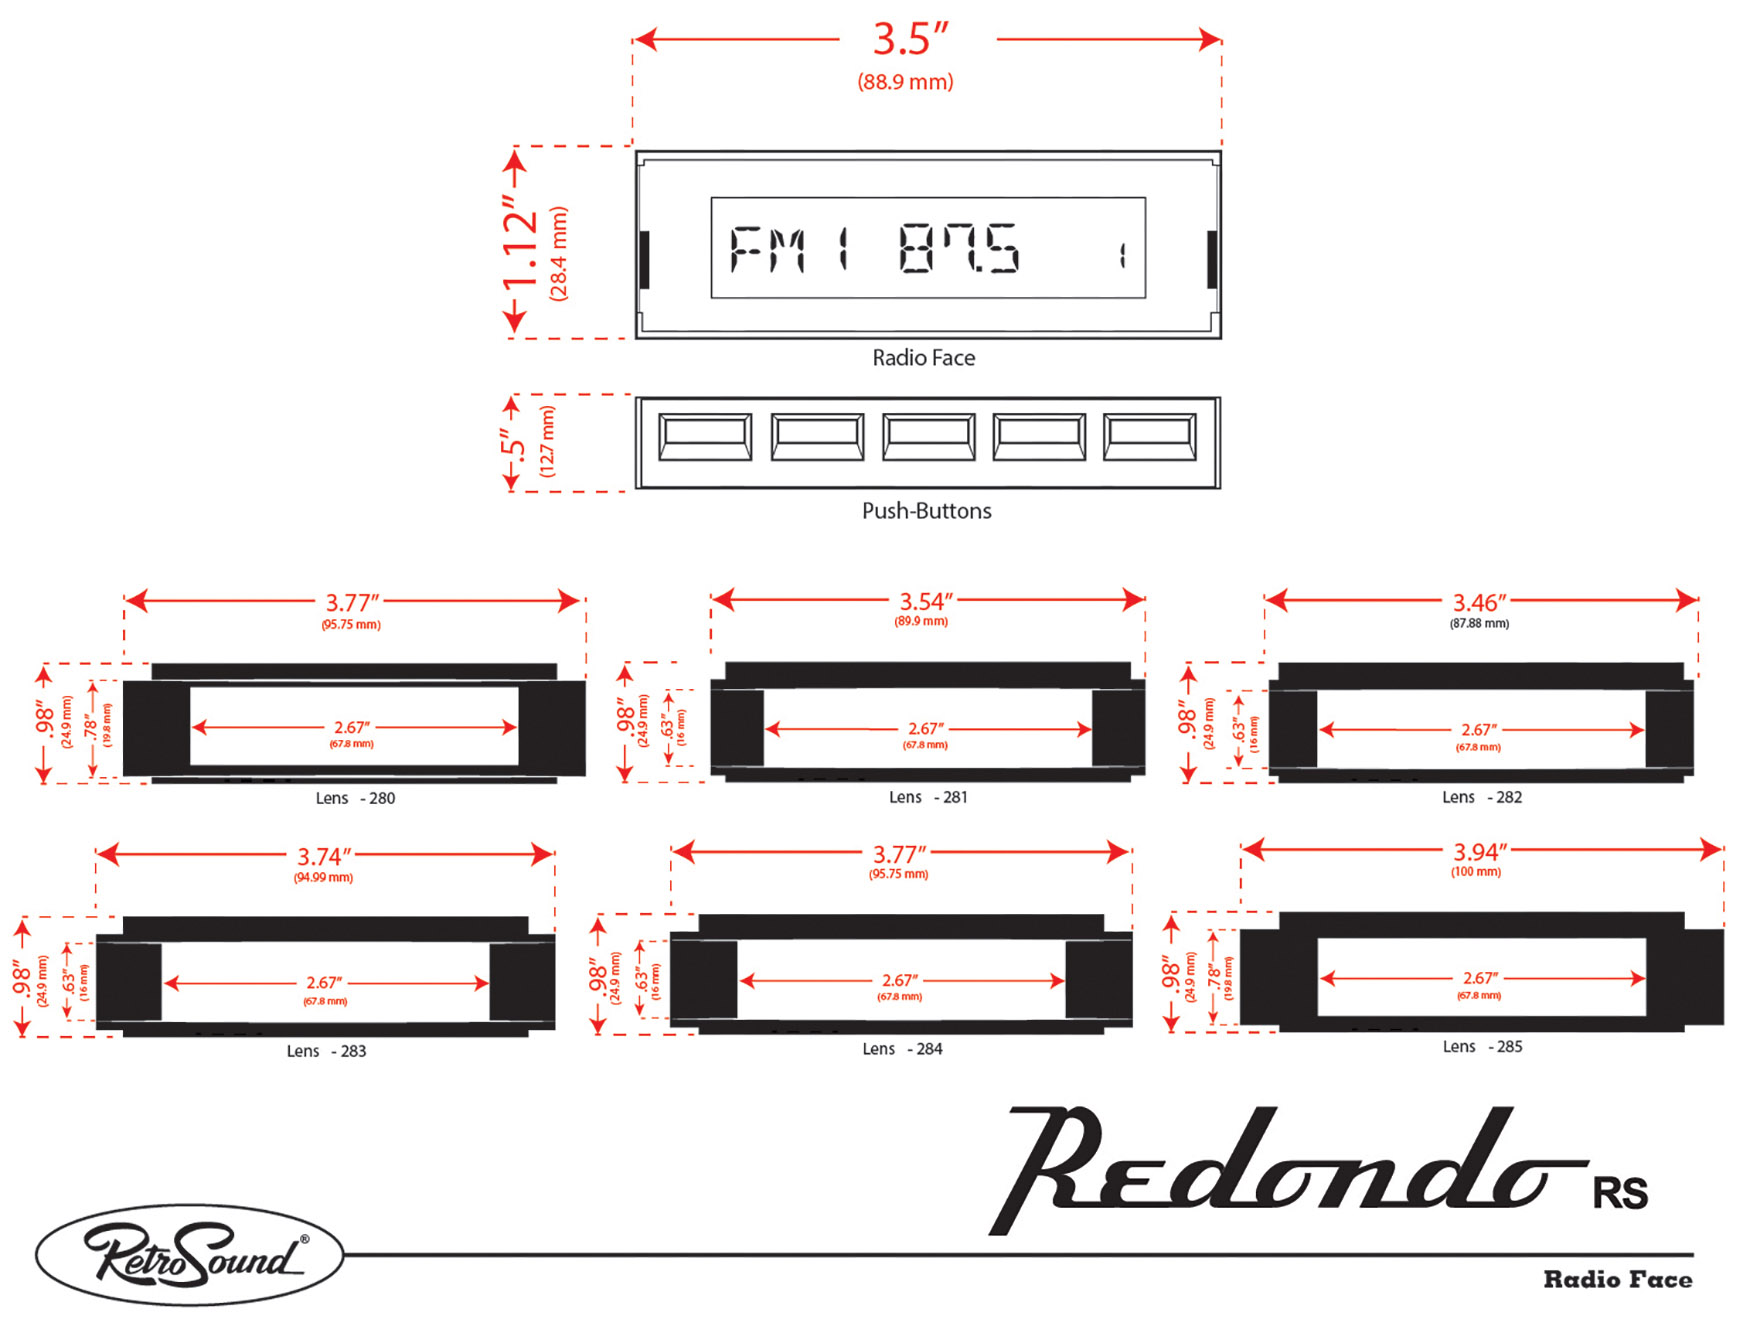 RetroSound Redondo RS Face Dimensions (Approx.)